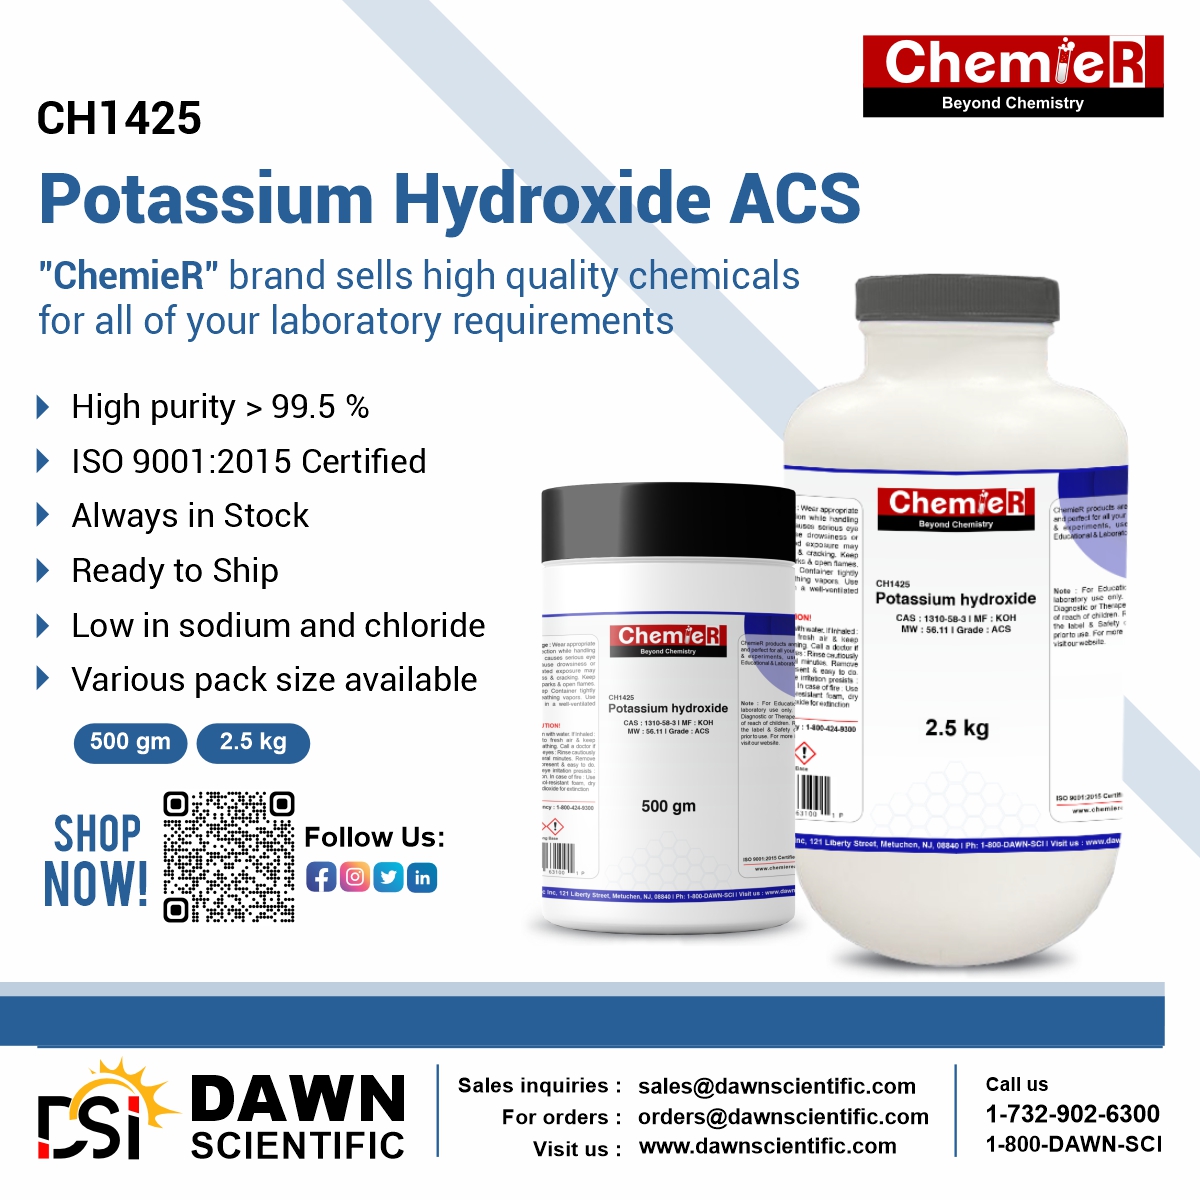 🔬 Elevate Your Lab with Potassium Hydroxide ACS! 🔬

Discover the purity difference with ChemieR at Dawn Scientific.

🧪 ChemieR: Beyond Chemistry

🌐 Visit us: dawnscientific.com

#HighPurityChemicals #ChemieR #QualityChemicals #LabEssentials #ChemistryLab #DawnScientific